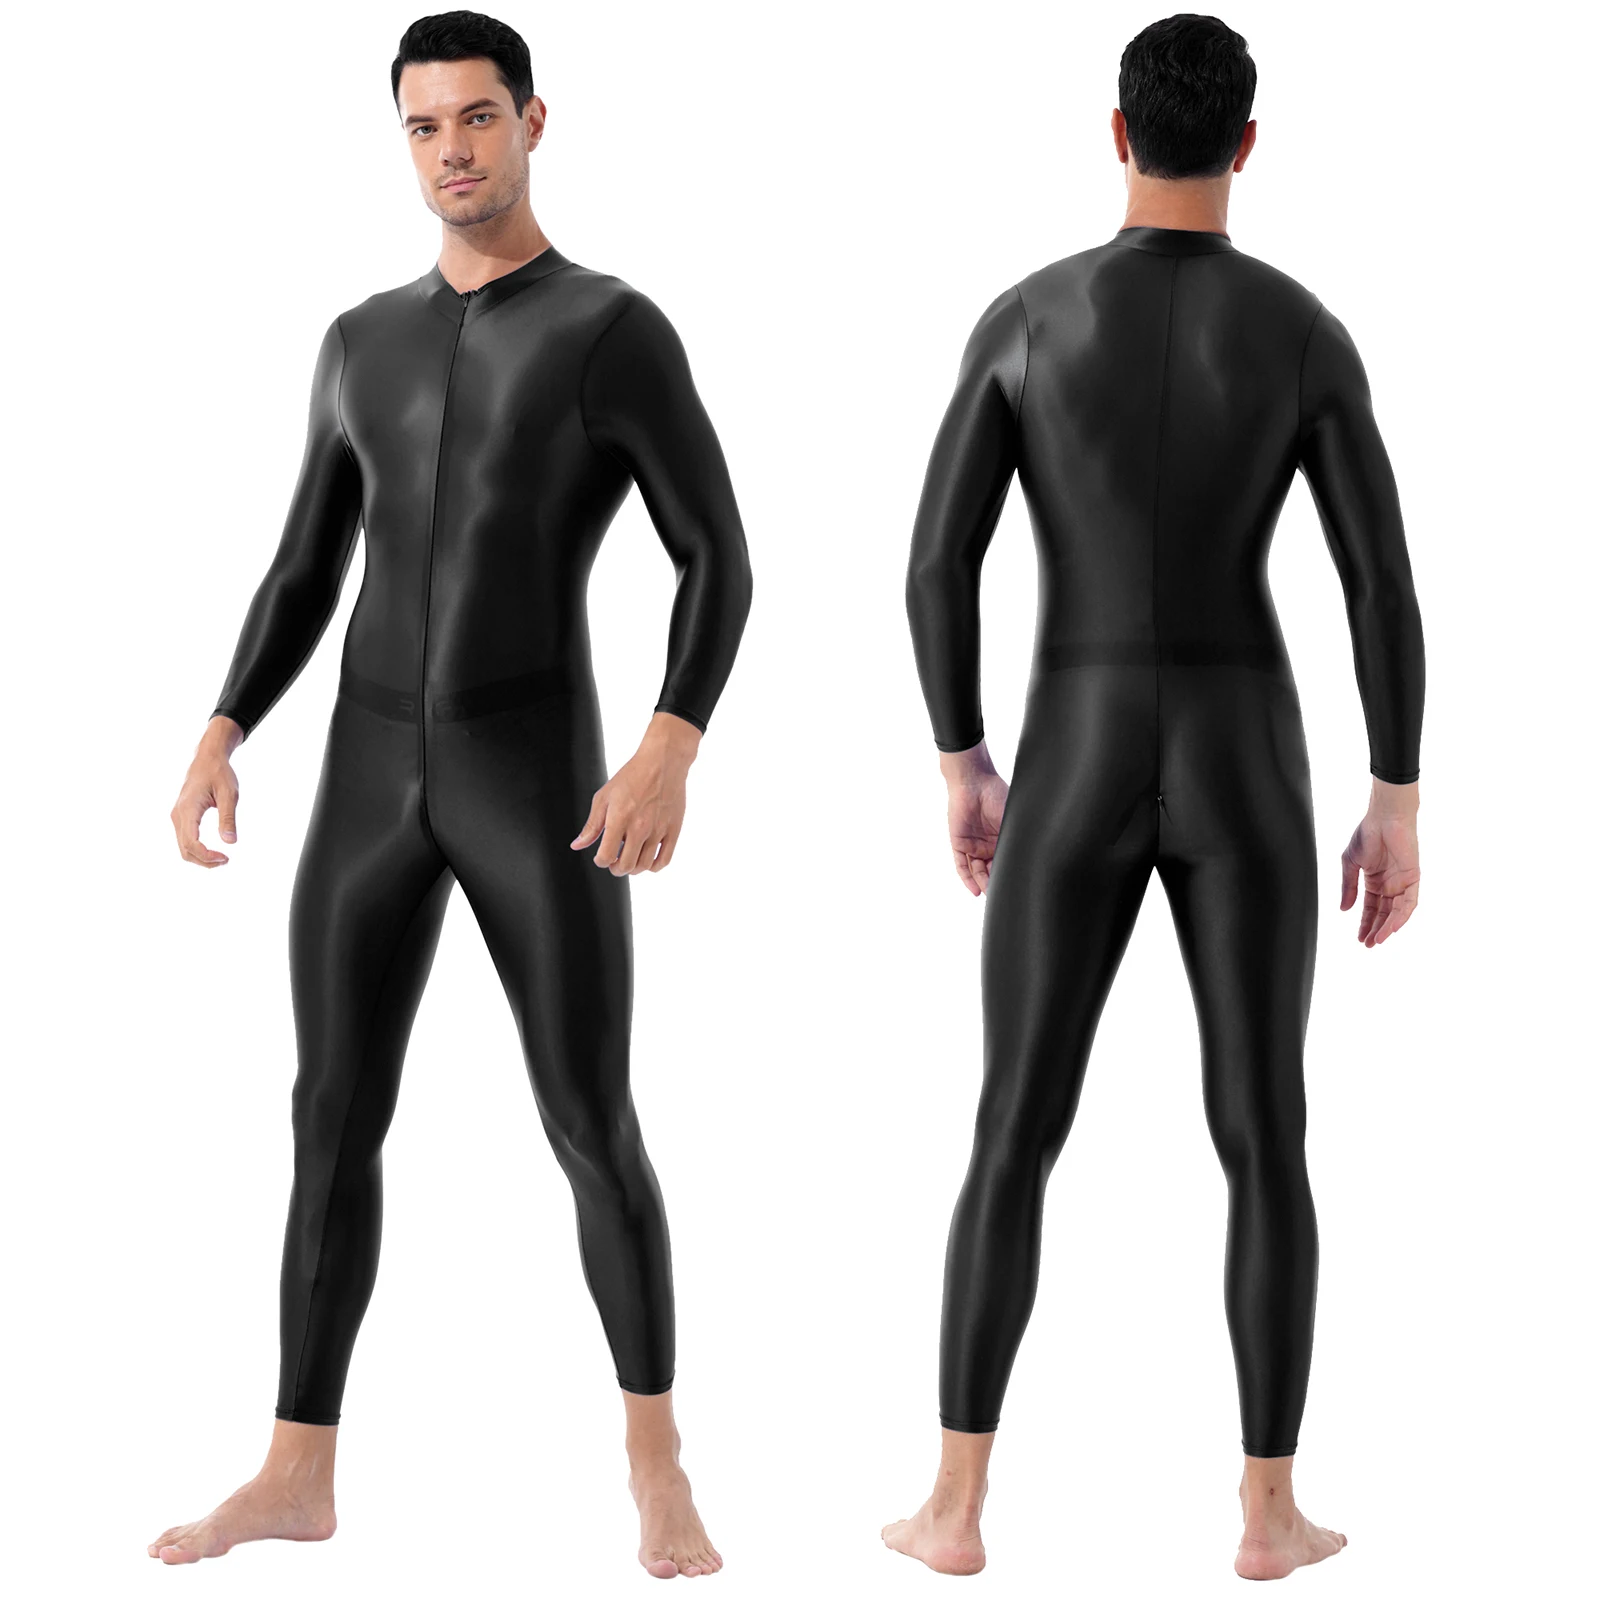 

Mens One-piece Black Shimmery Smooth Lingerie High Neck Long Sleeves Ankle Length Double-ended Zipper Leotard Bodysuit Jumpsuit